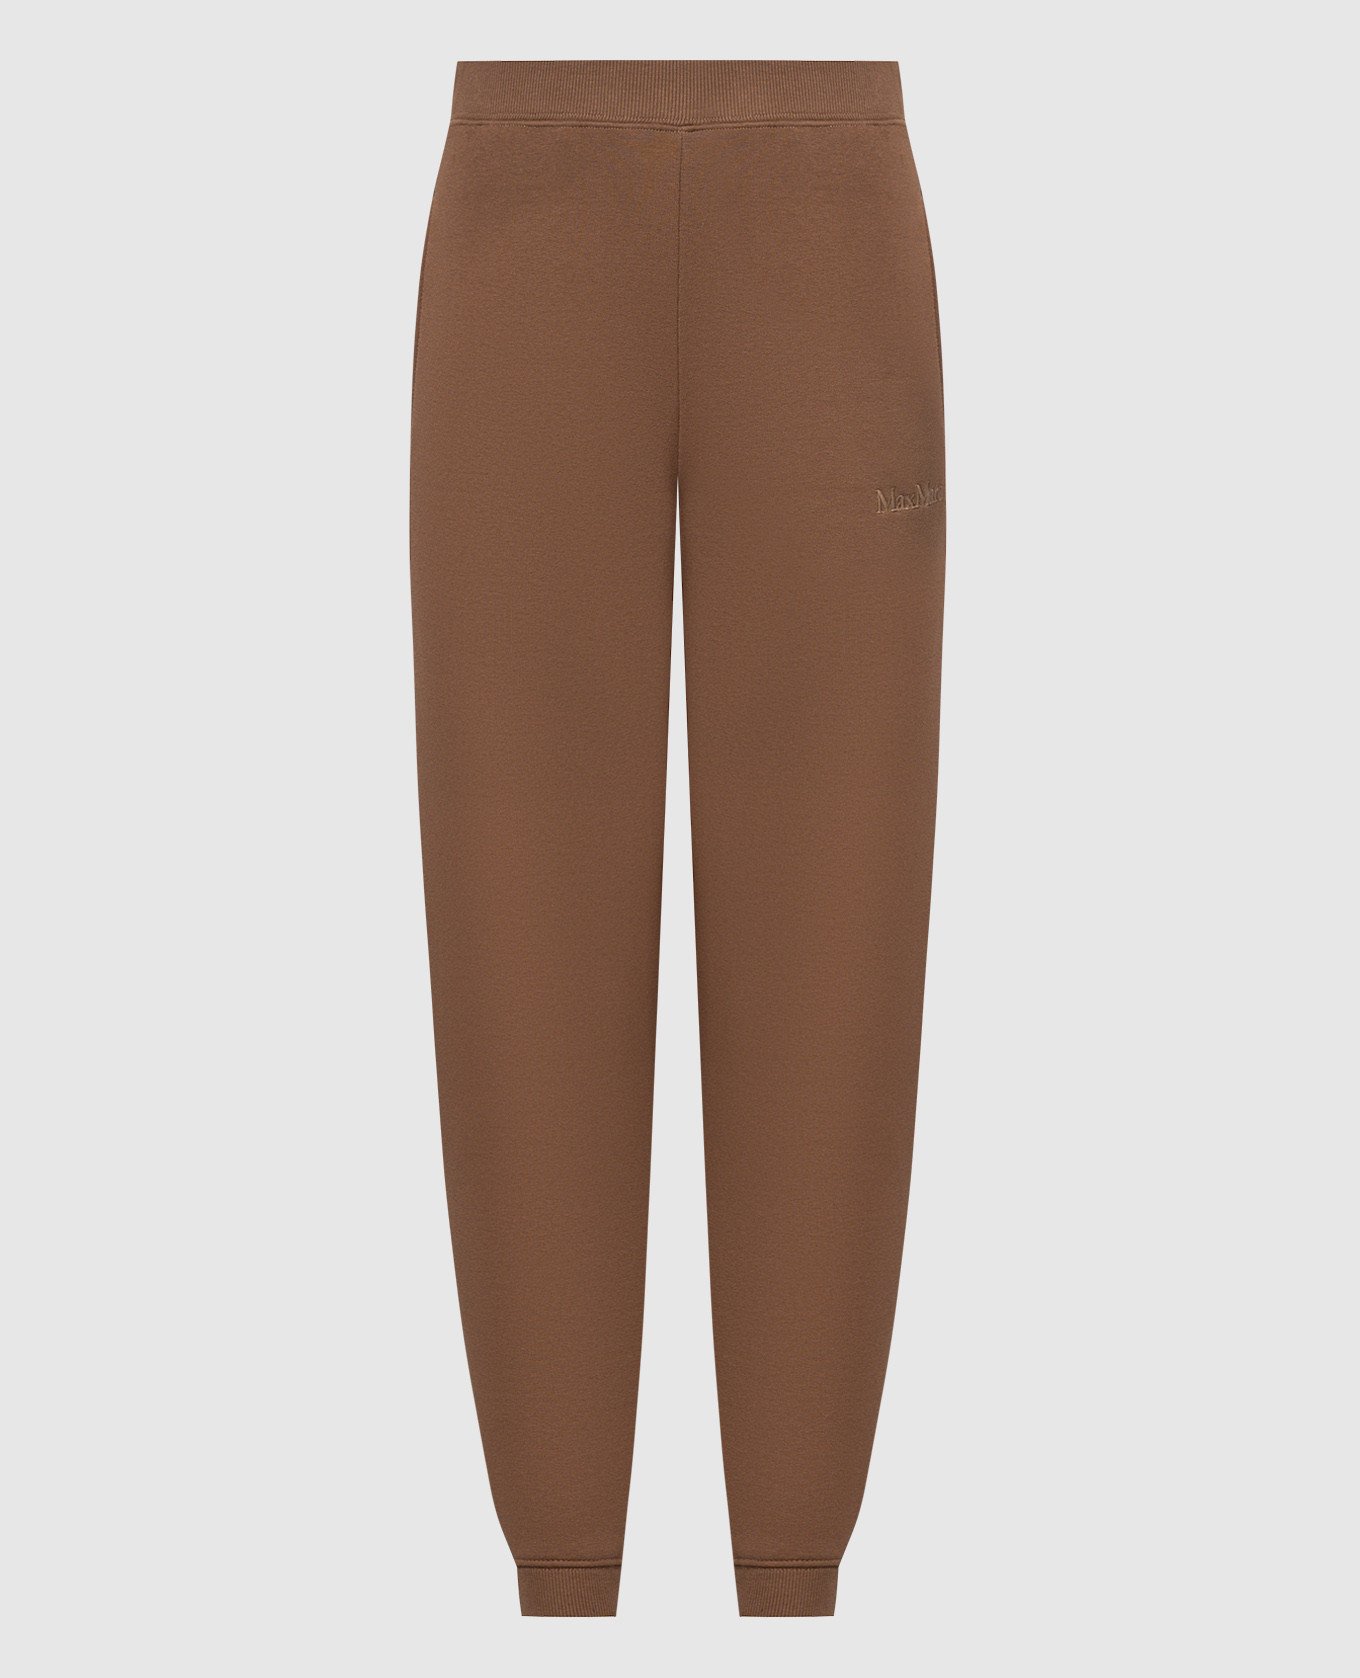 Tamaro joggers in brown with logo embroidery